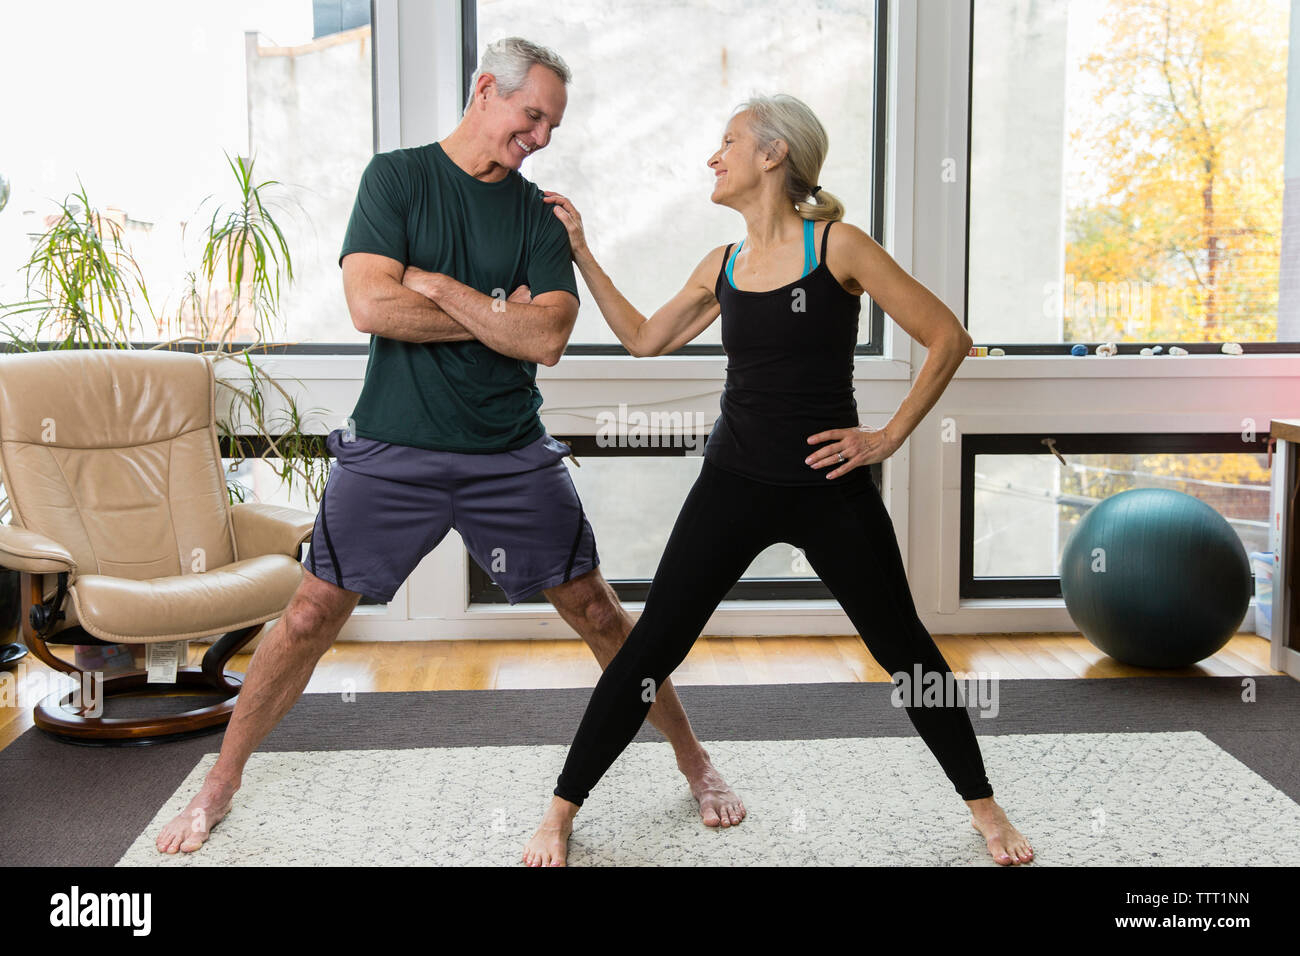 Smiling woman talking with man while exercising against windows at home Stock Photo